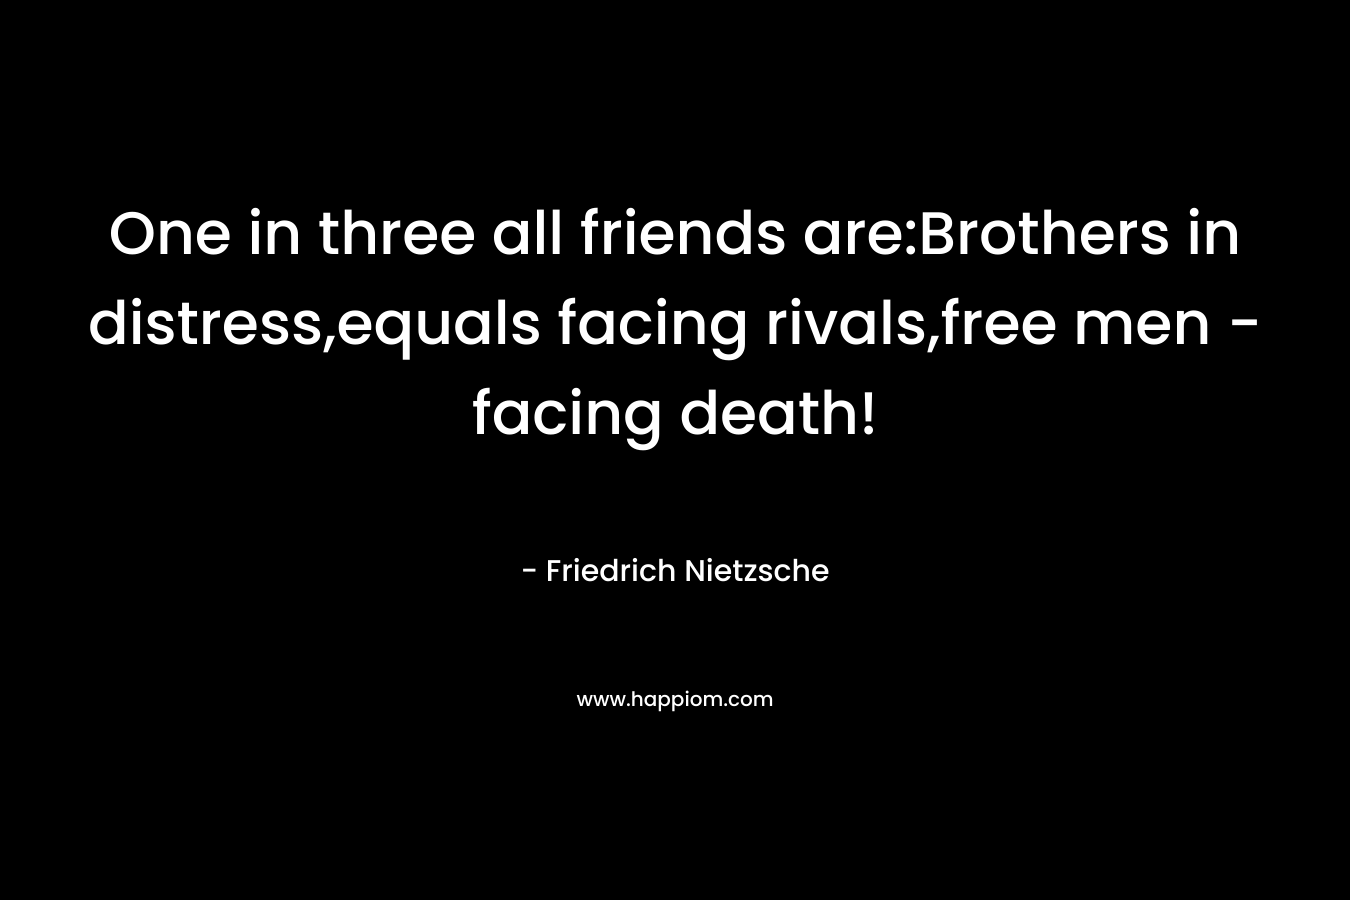 One in three all friends are:Brothers in distress,equals facing rivals,free men - facing death!